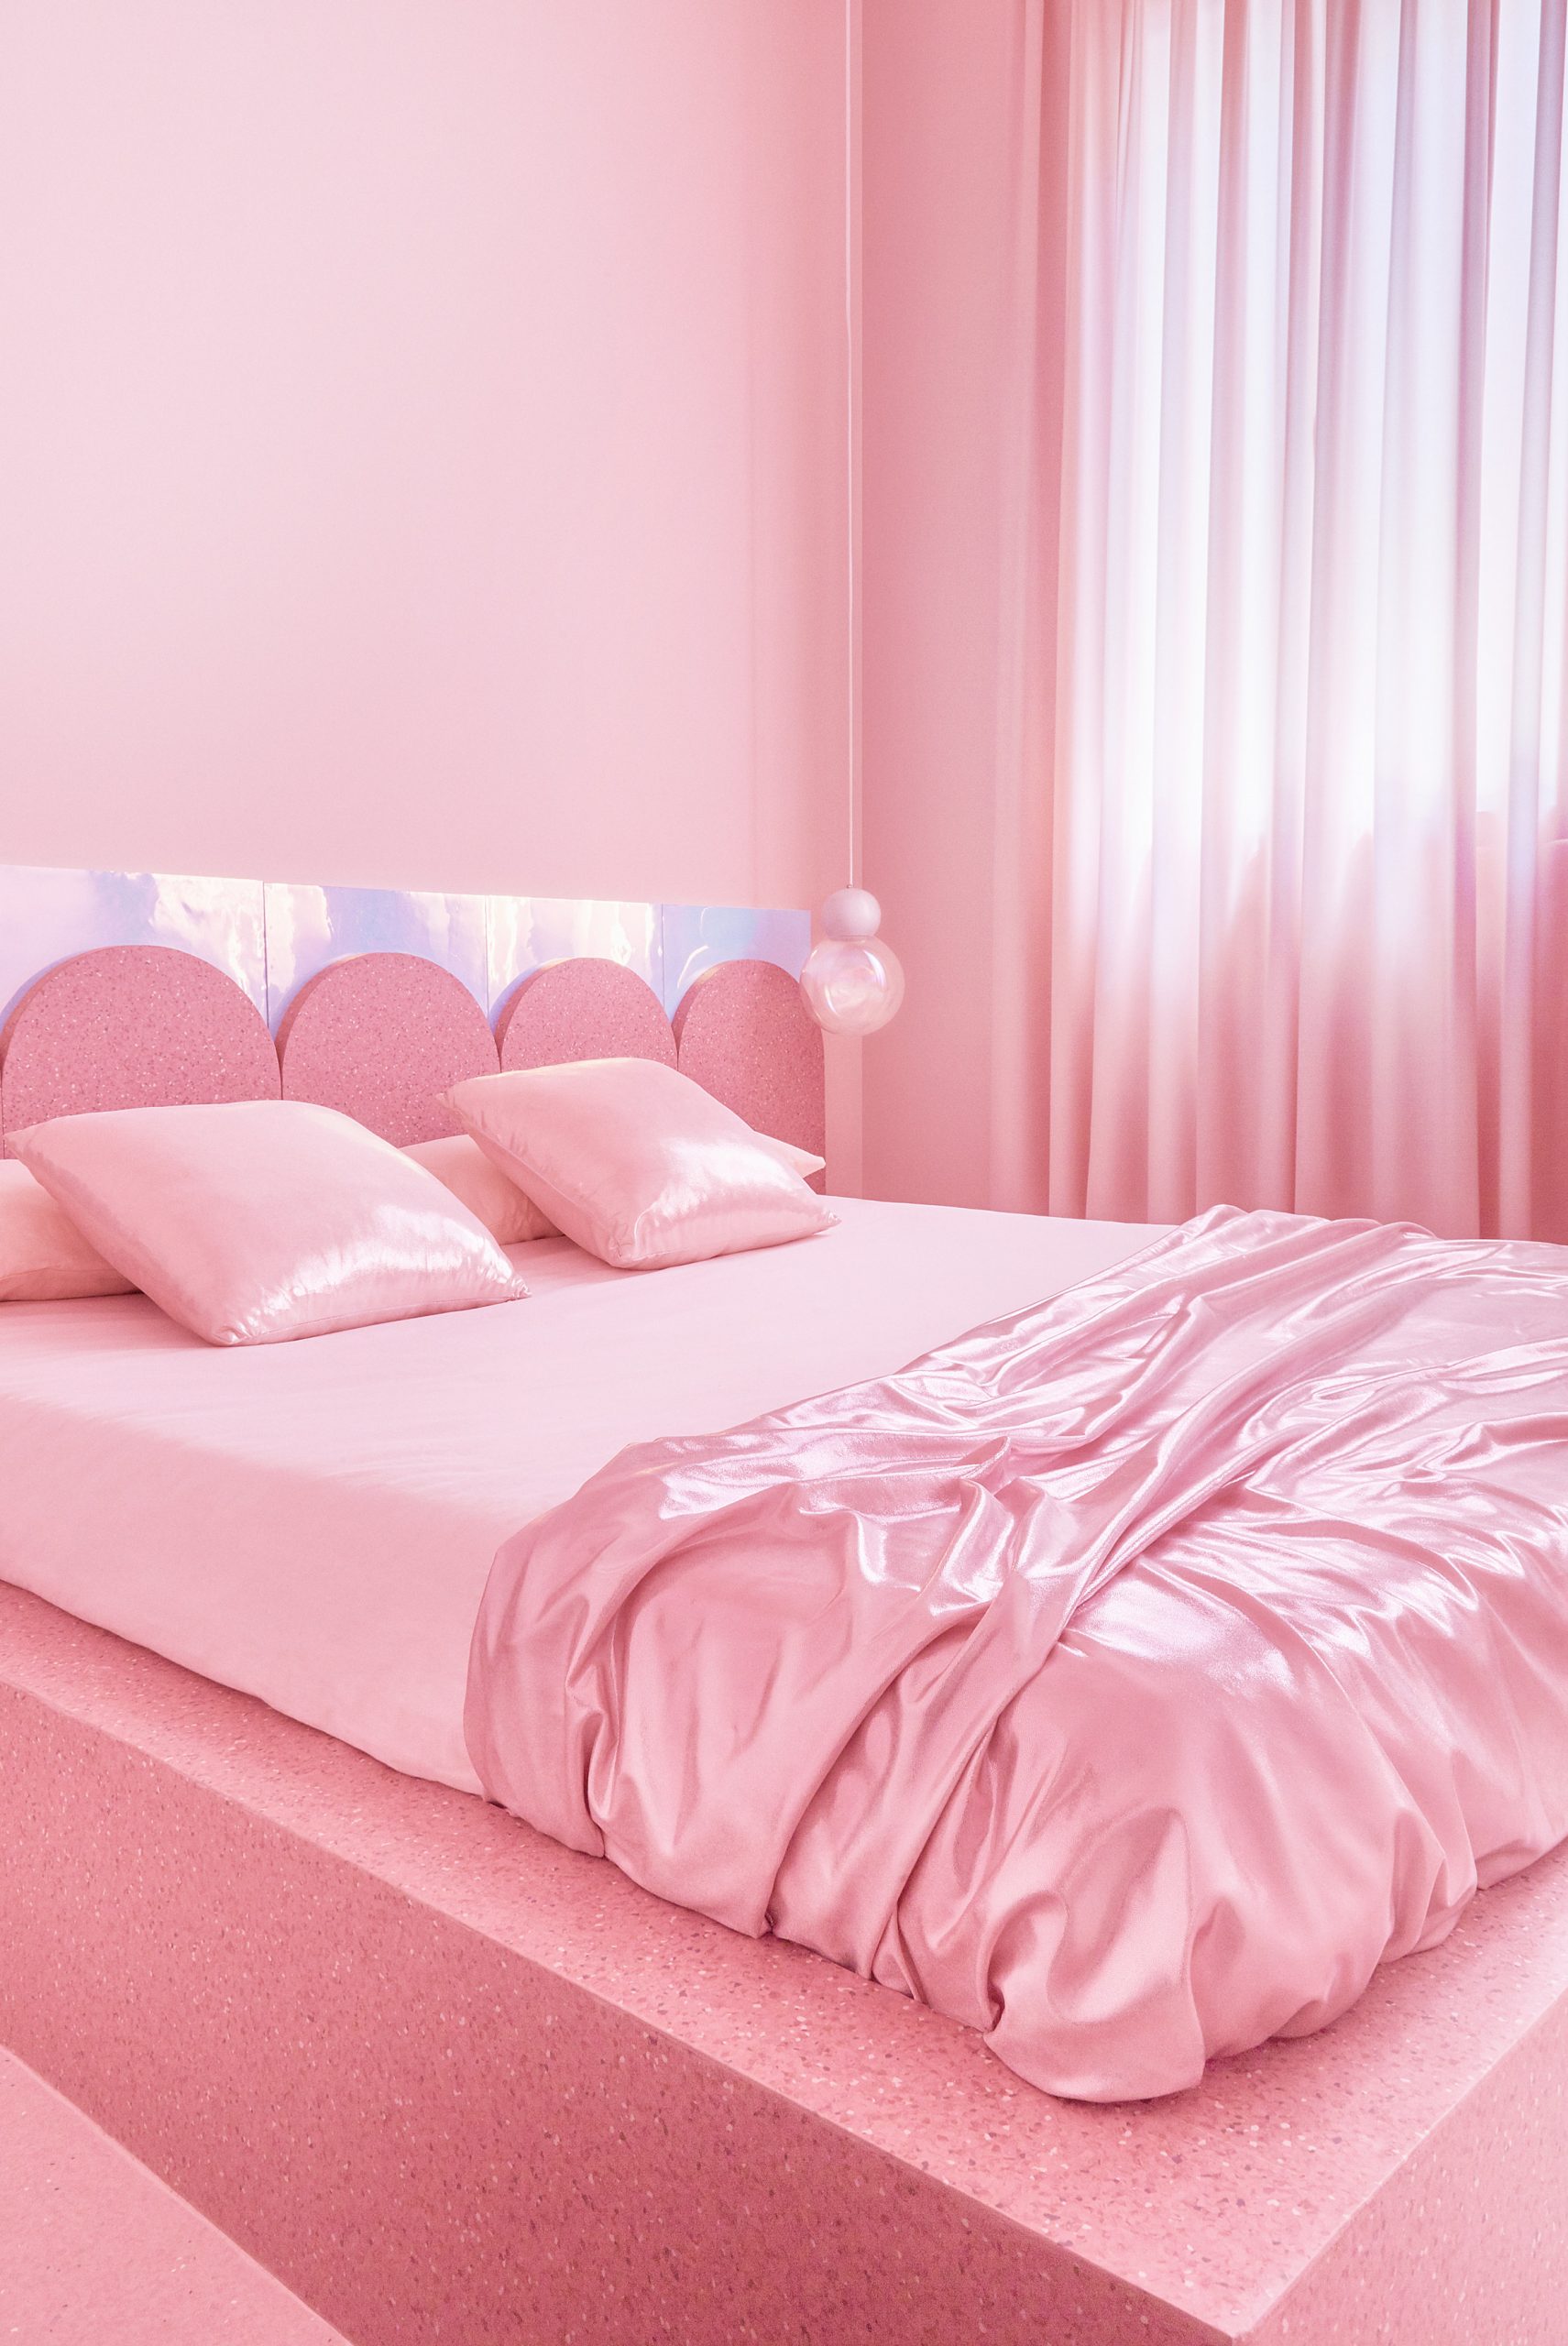 Minimal Fantasy Holiday Apartment In Madrid Is Almost Completely Pink